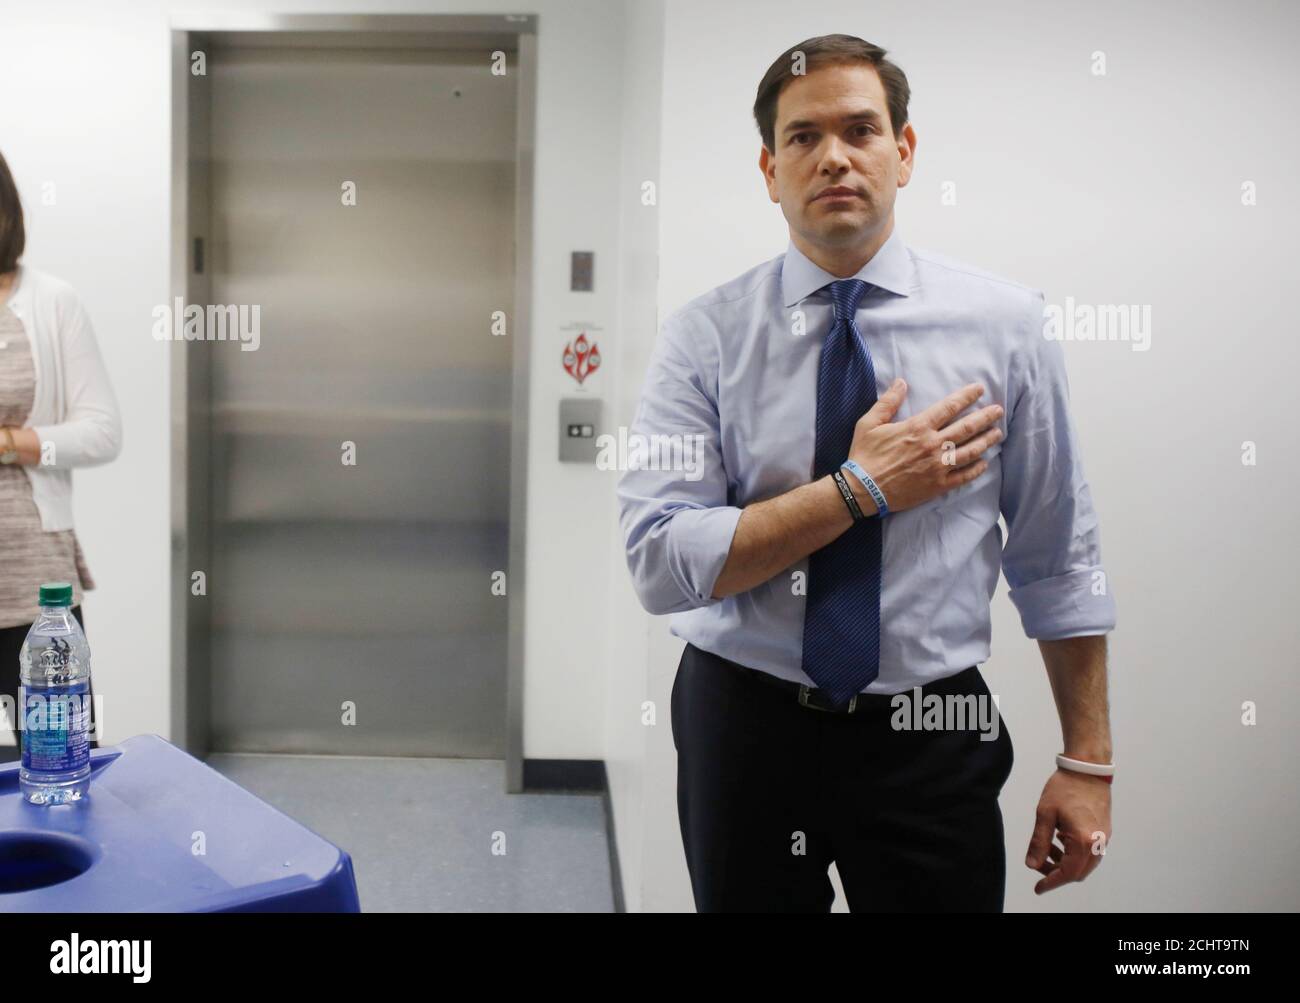 Republican U.S. presidential candidate Marco Rubio is seen pledge allegiance to the flag at backstage before being introduced at a campaign event at Palm Beach Atlantic University in West Palm Beach, Florida March 14, 2016.     REUTERS/Carlo Allegri Stock Photo